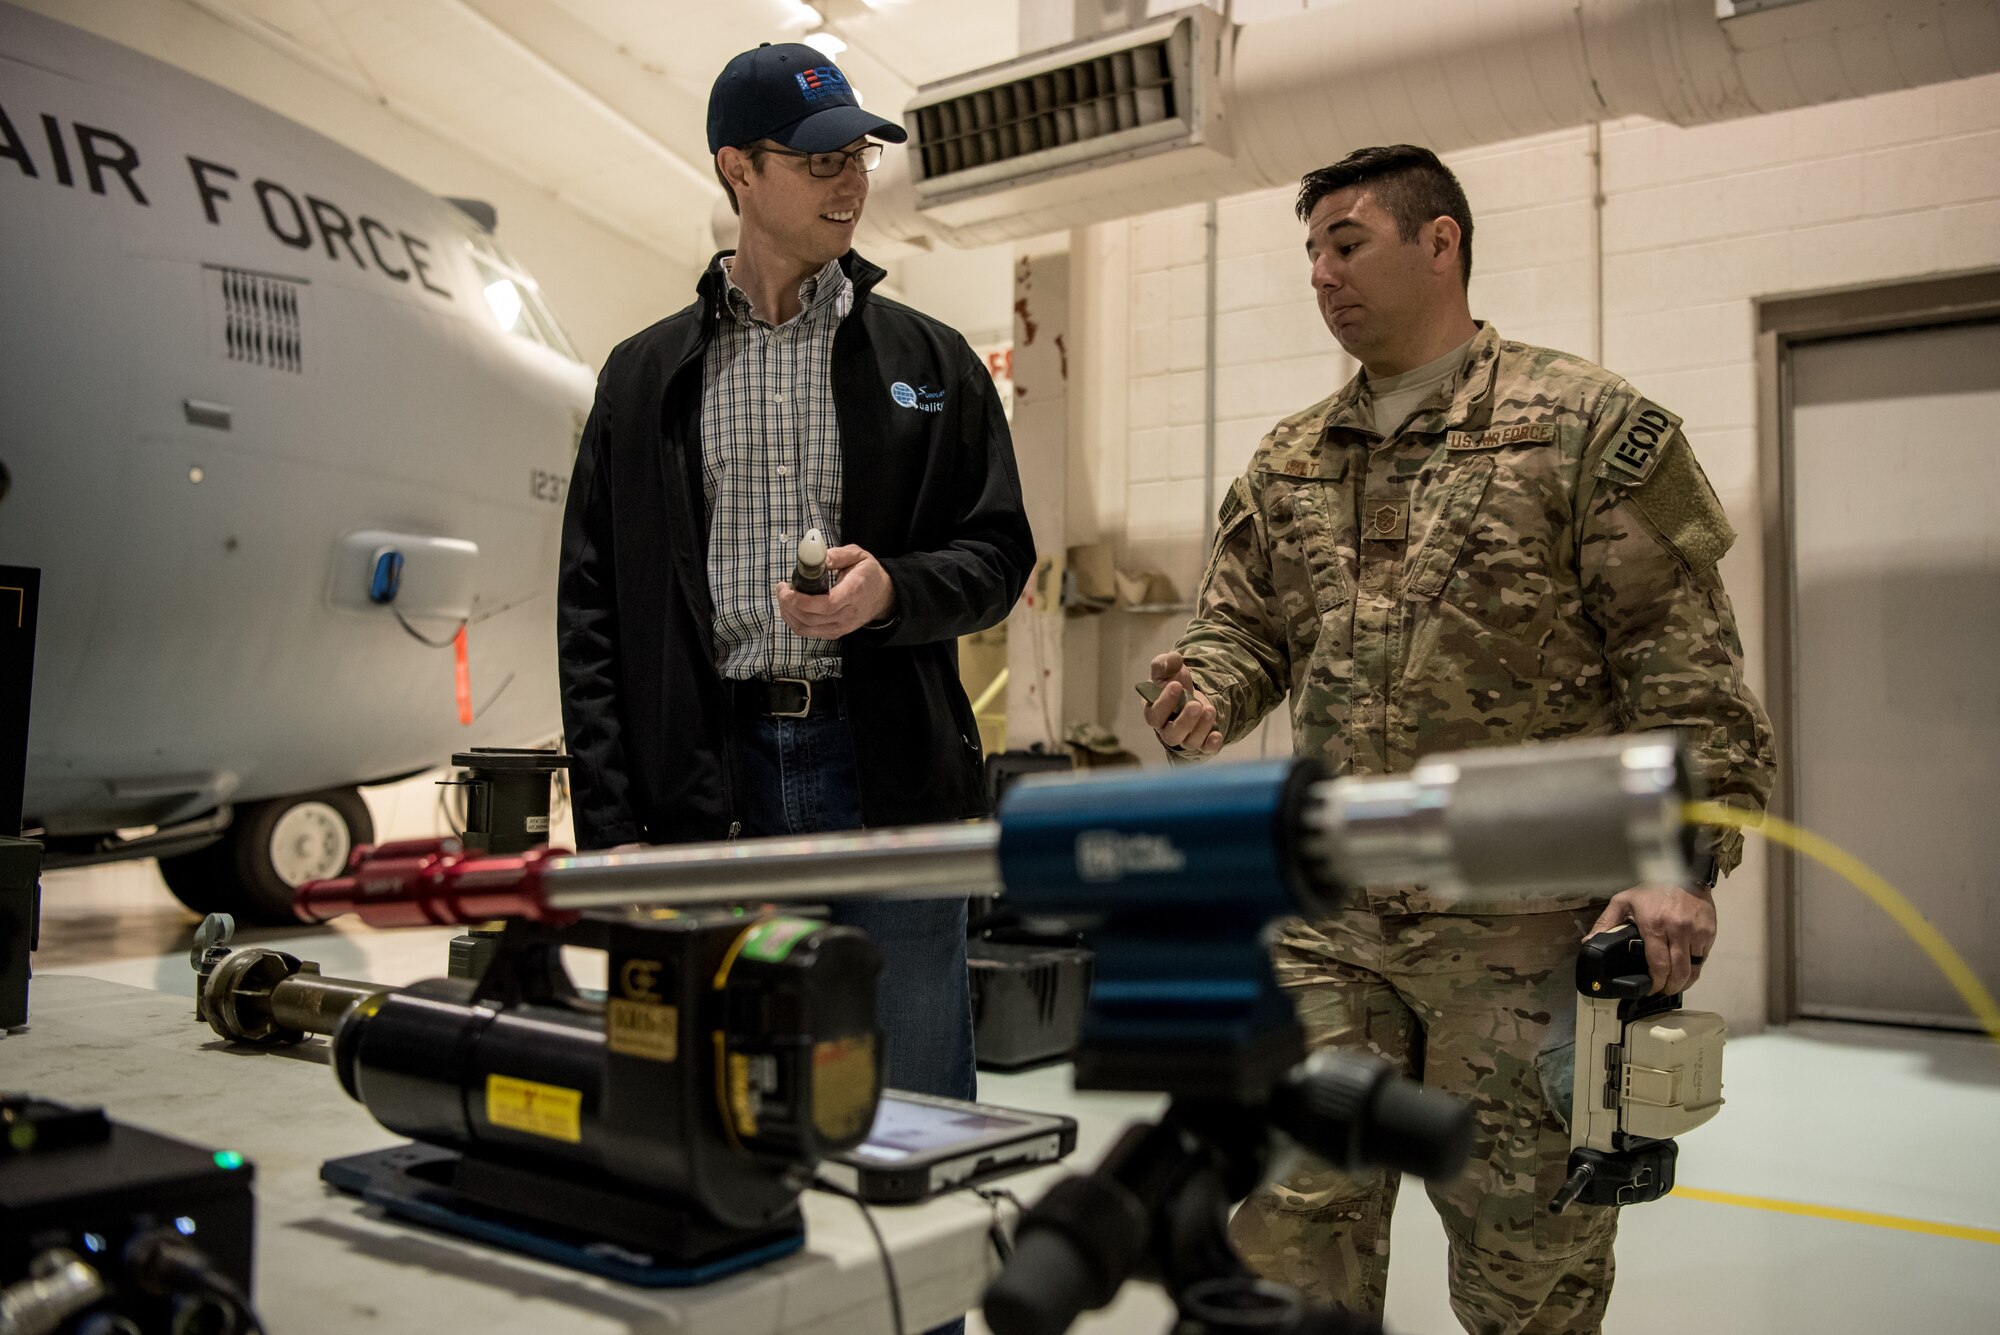 Master Sgt. Matthew Wilt of the 123rd Explosive Ordnance Disposal Flight demonstrates the use of EOD equipment to a civilian employer at the Kentucky Air National Guard Base in Louisville, Ky., March 15, 2019. The employers were participating in an Employer Support of the Guard and Reserve “Bosslift,” which enhances awareness and understanding between National Guardsmen and the civilian employers for whom they work when they’re not on duty. (U.S. Air National Guard photo by Staff Sgt. Joshua Horton)